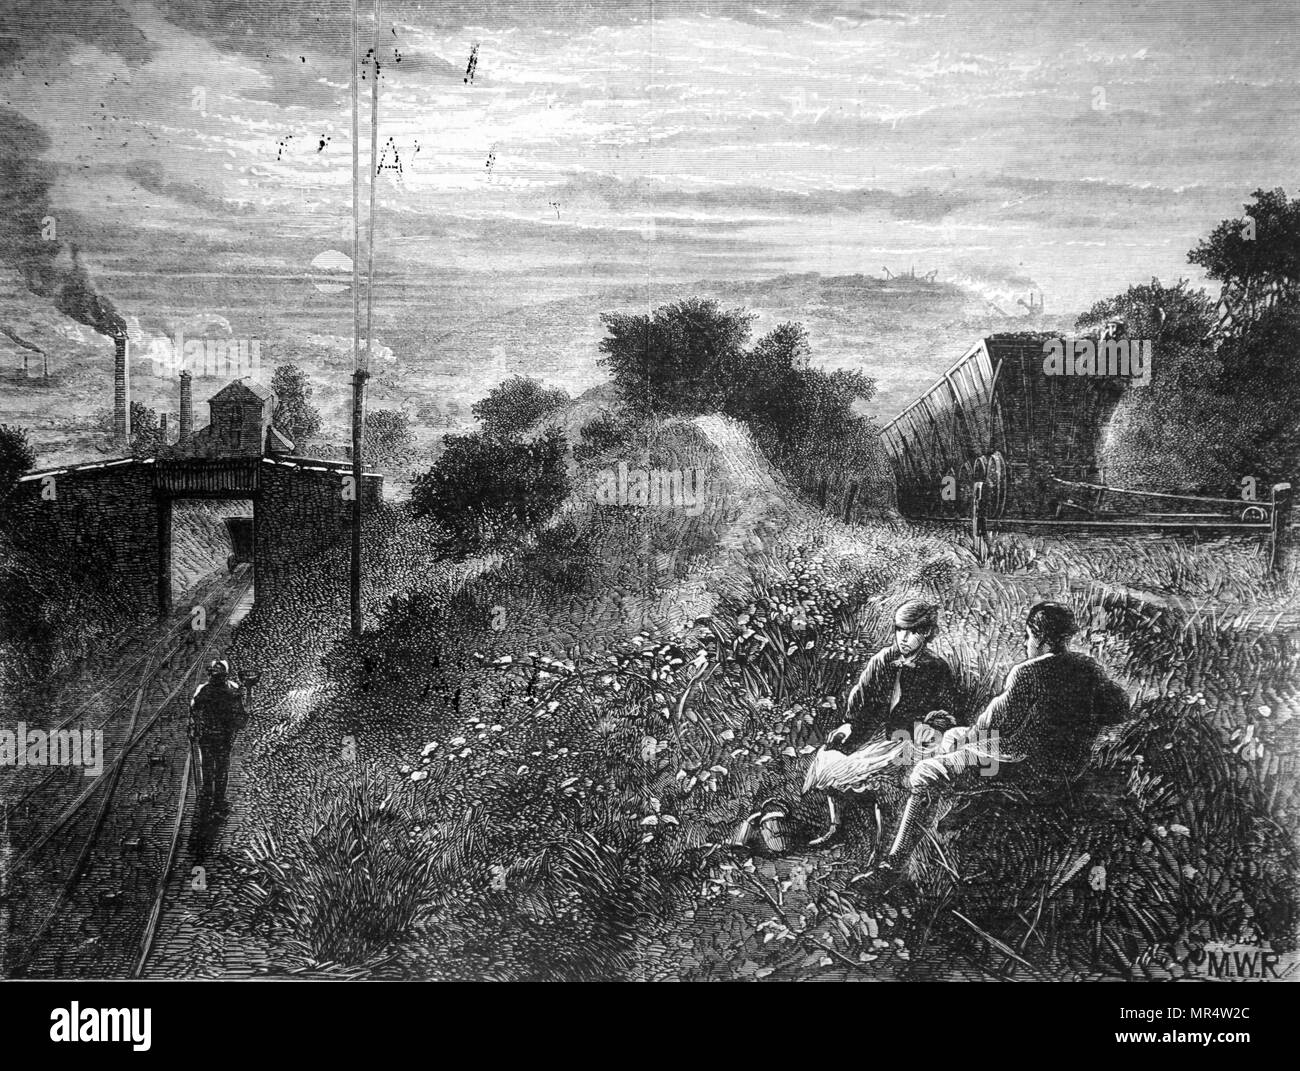 Engraving showing the countryside scarred by mining- a typical scene in the Northumberland and Durham mining districts. On the right of the picture is the top of an inclined plane for transporting coal away from the pit head. The weight of the loaded wagons going down the incline hauled up the empty wagons to the top of the incline on a parallel track. Dated 19th century Stock Photo